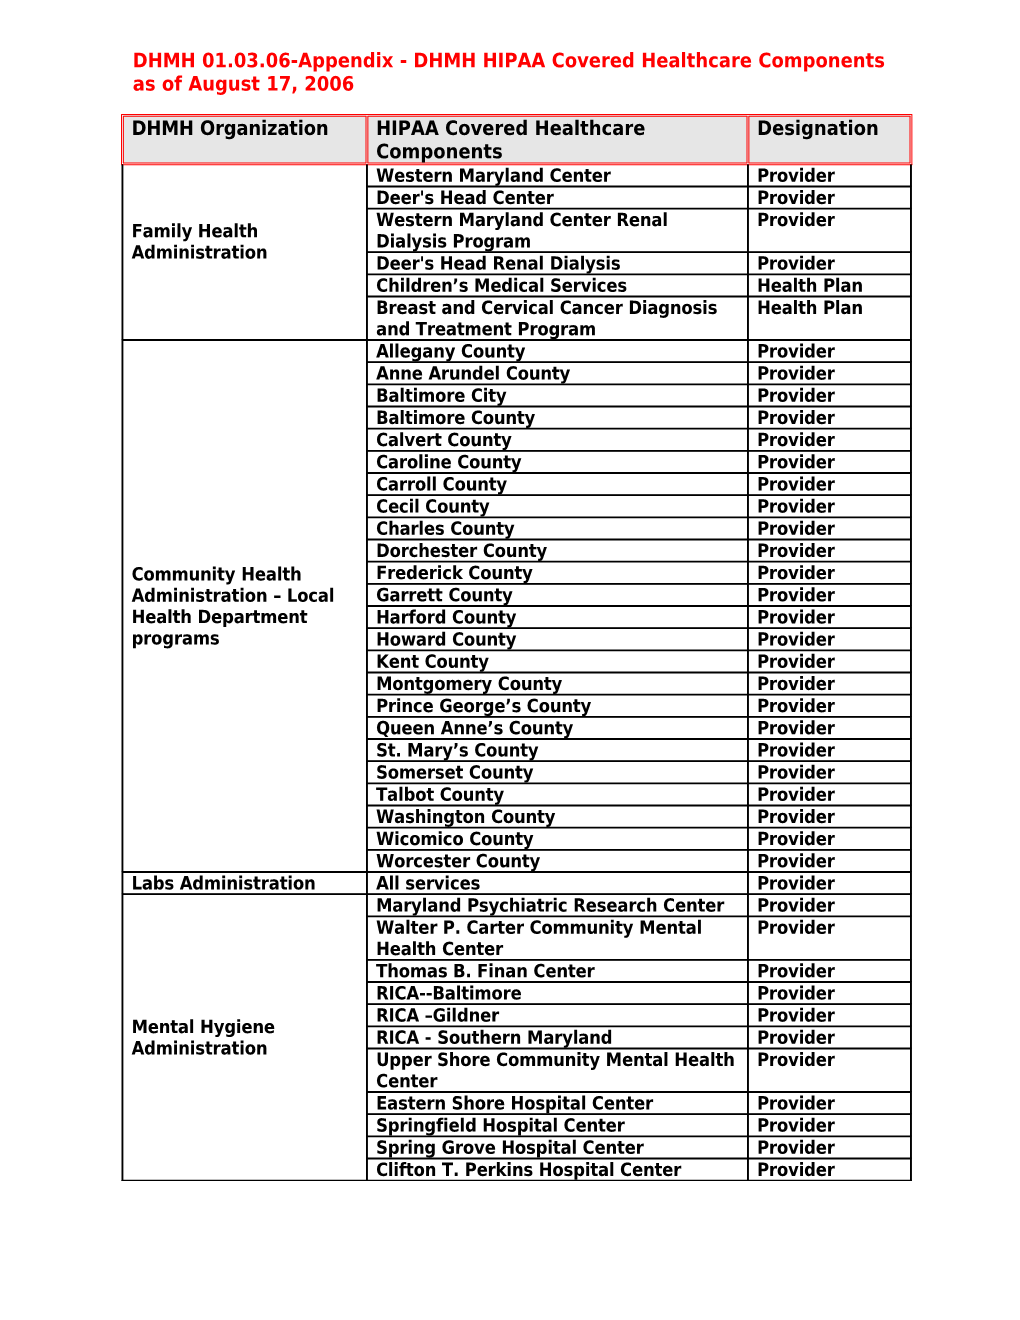 DHMH 01.03.06-Appendix-DHMH HIPAA Covered Healthcarecomponents As of August 17, 2006